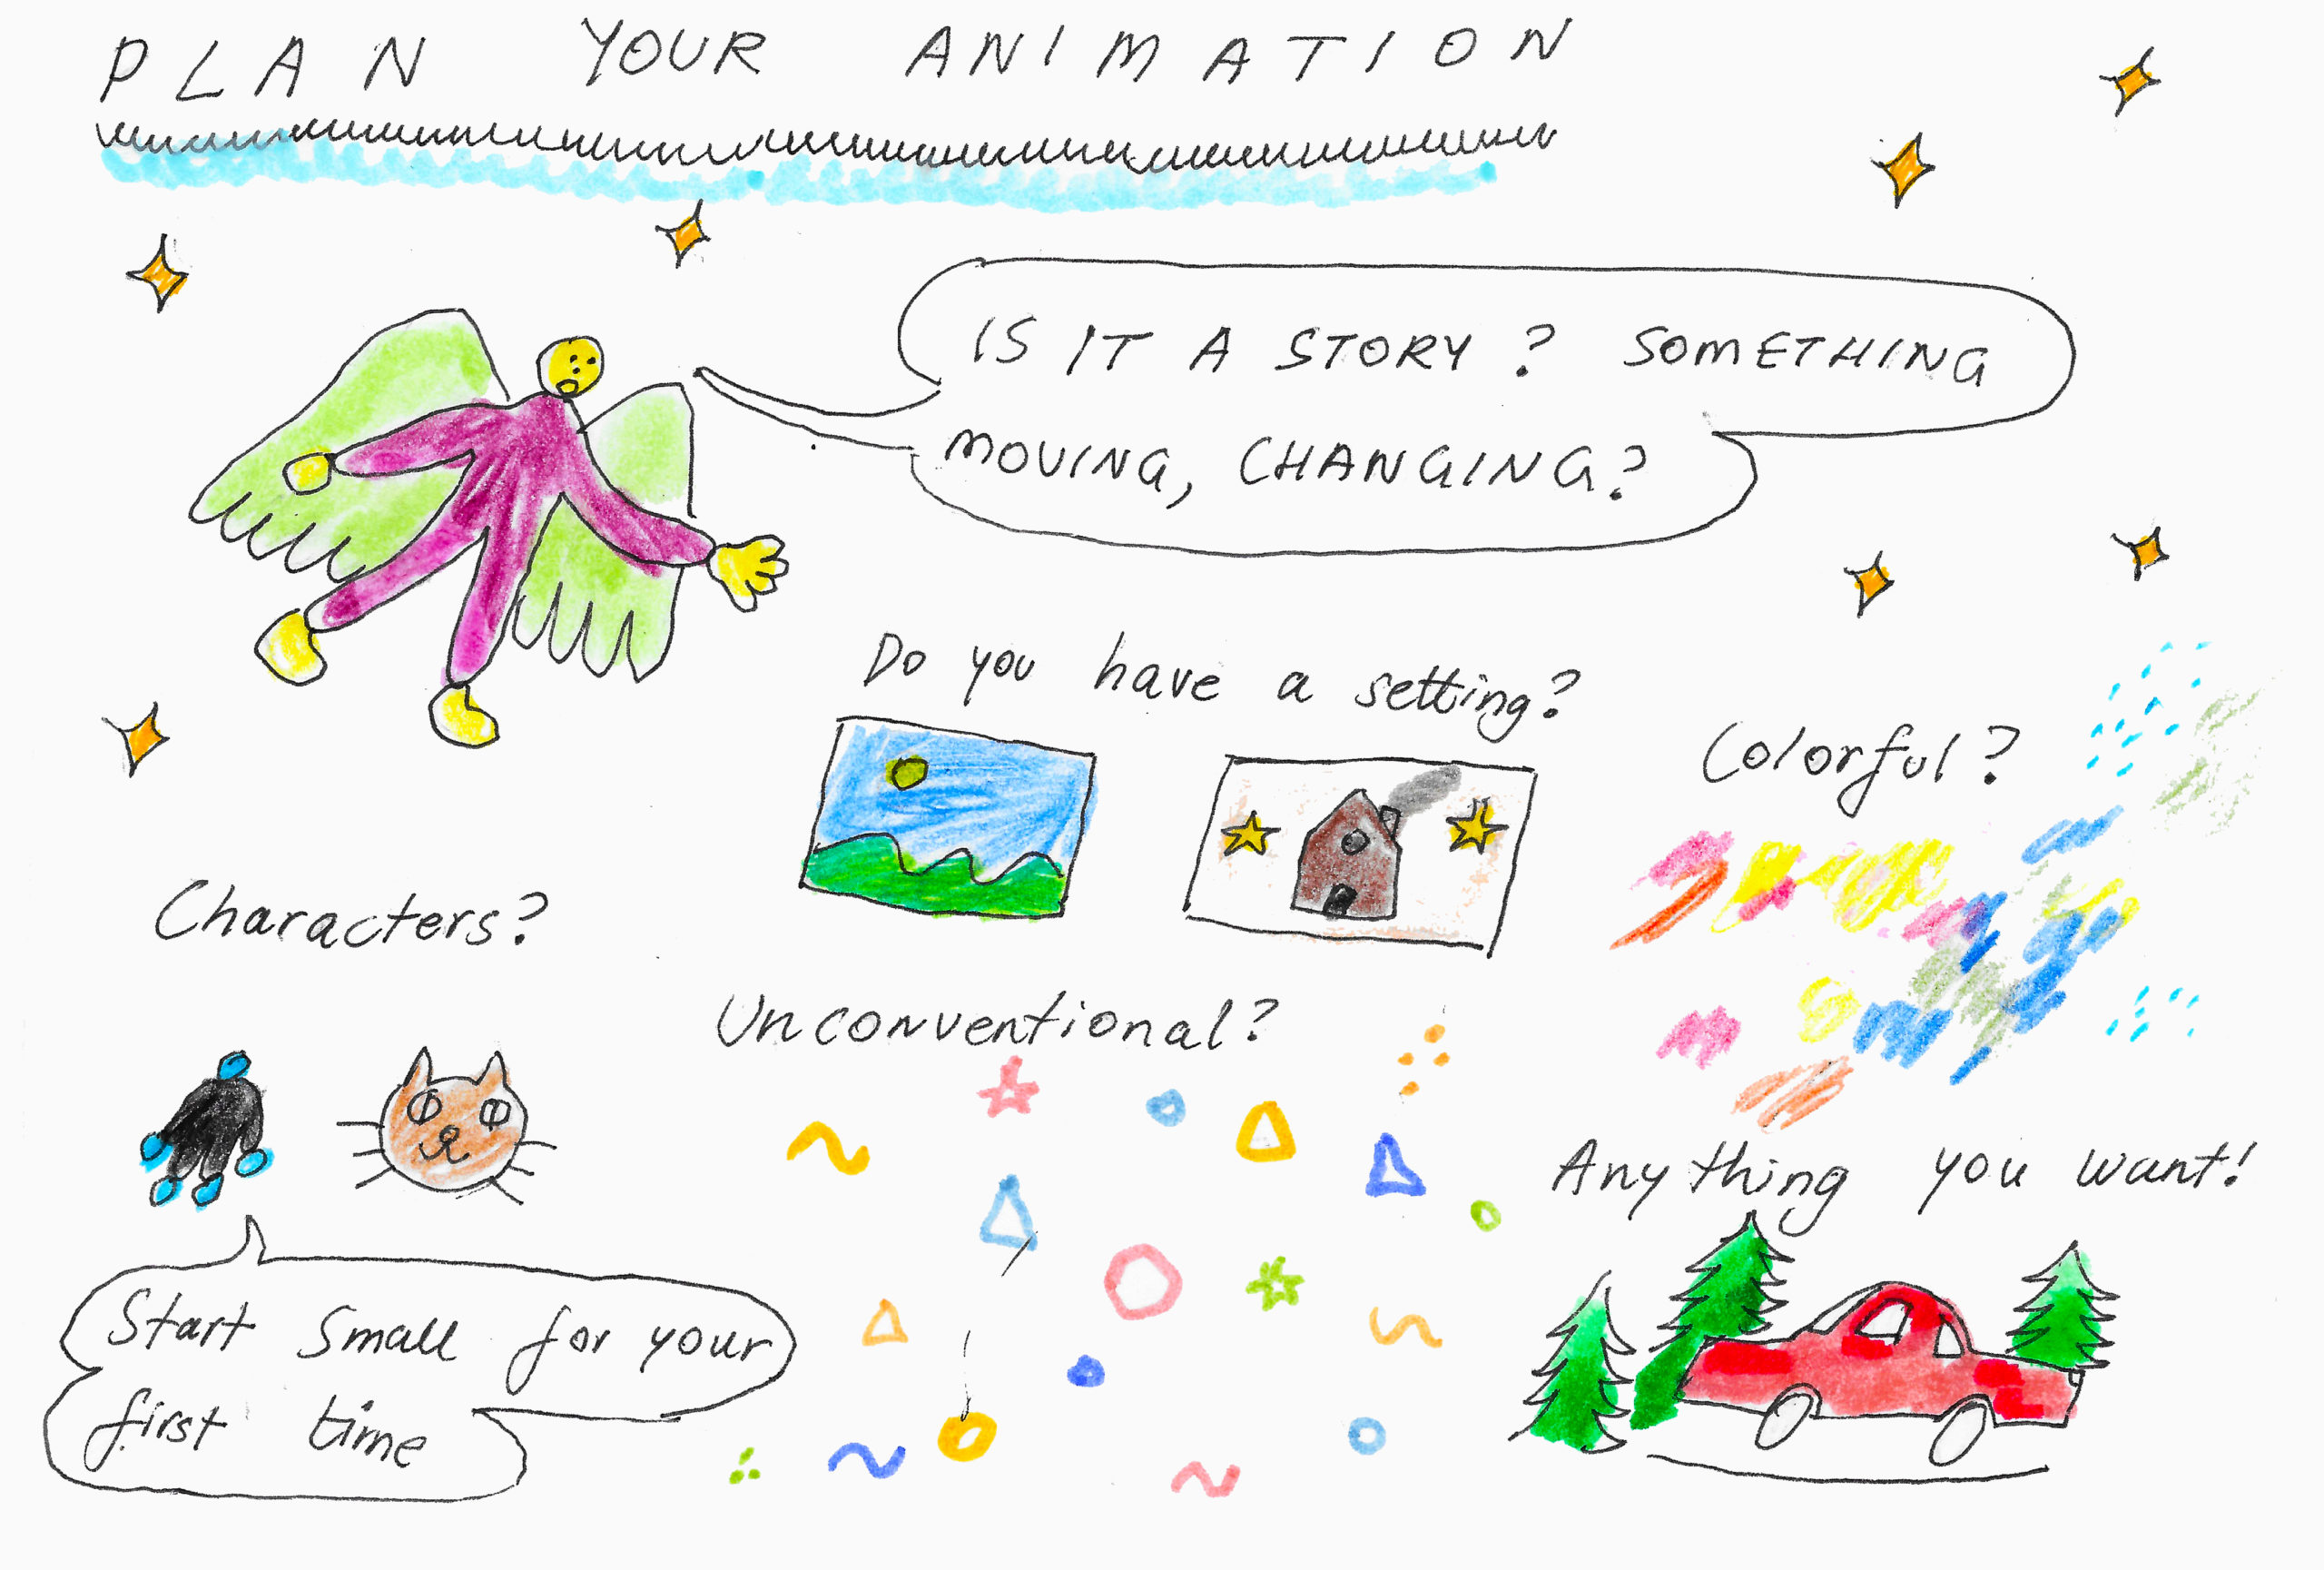 Plan your animation
Is it a story? Something moving, changing?
Do you have a setting?
Characters?
Unconventional?
Colorful?
Anything you want!
Start small for your first time.